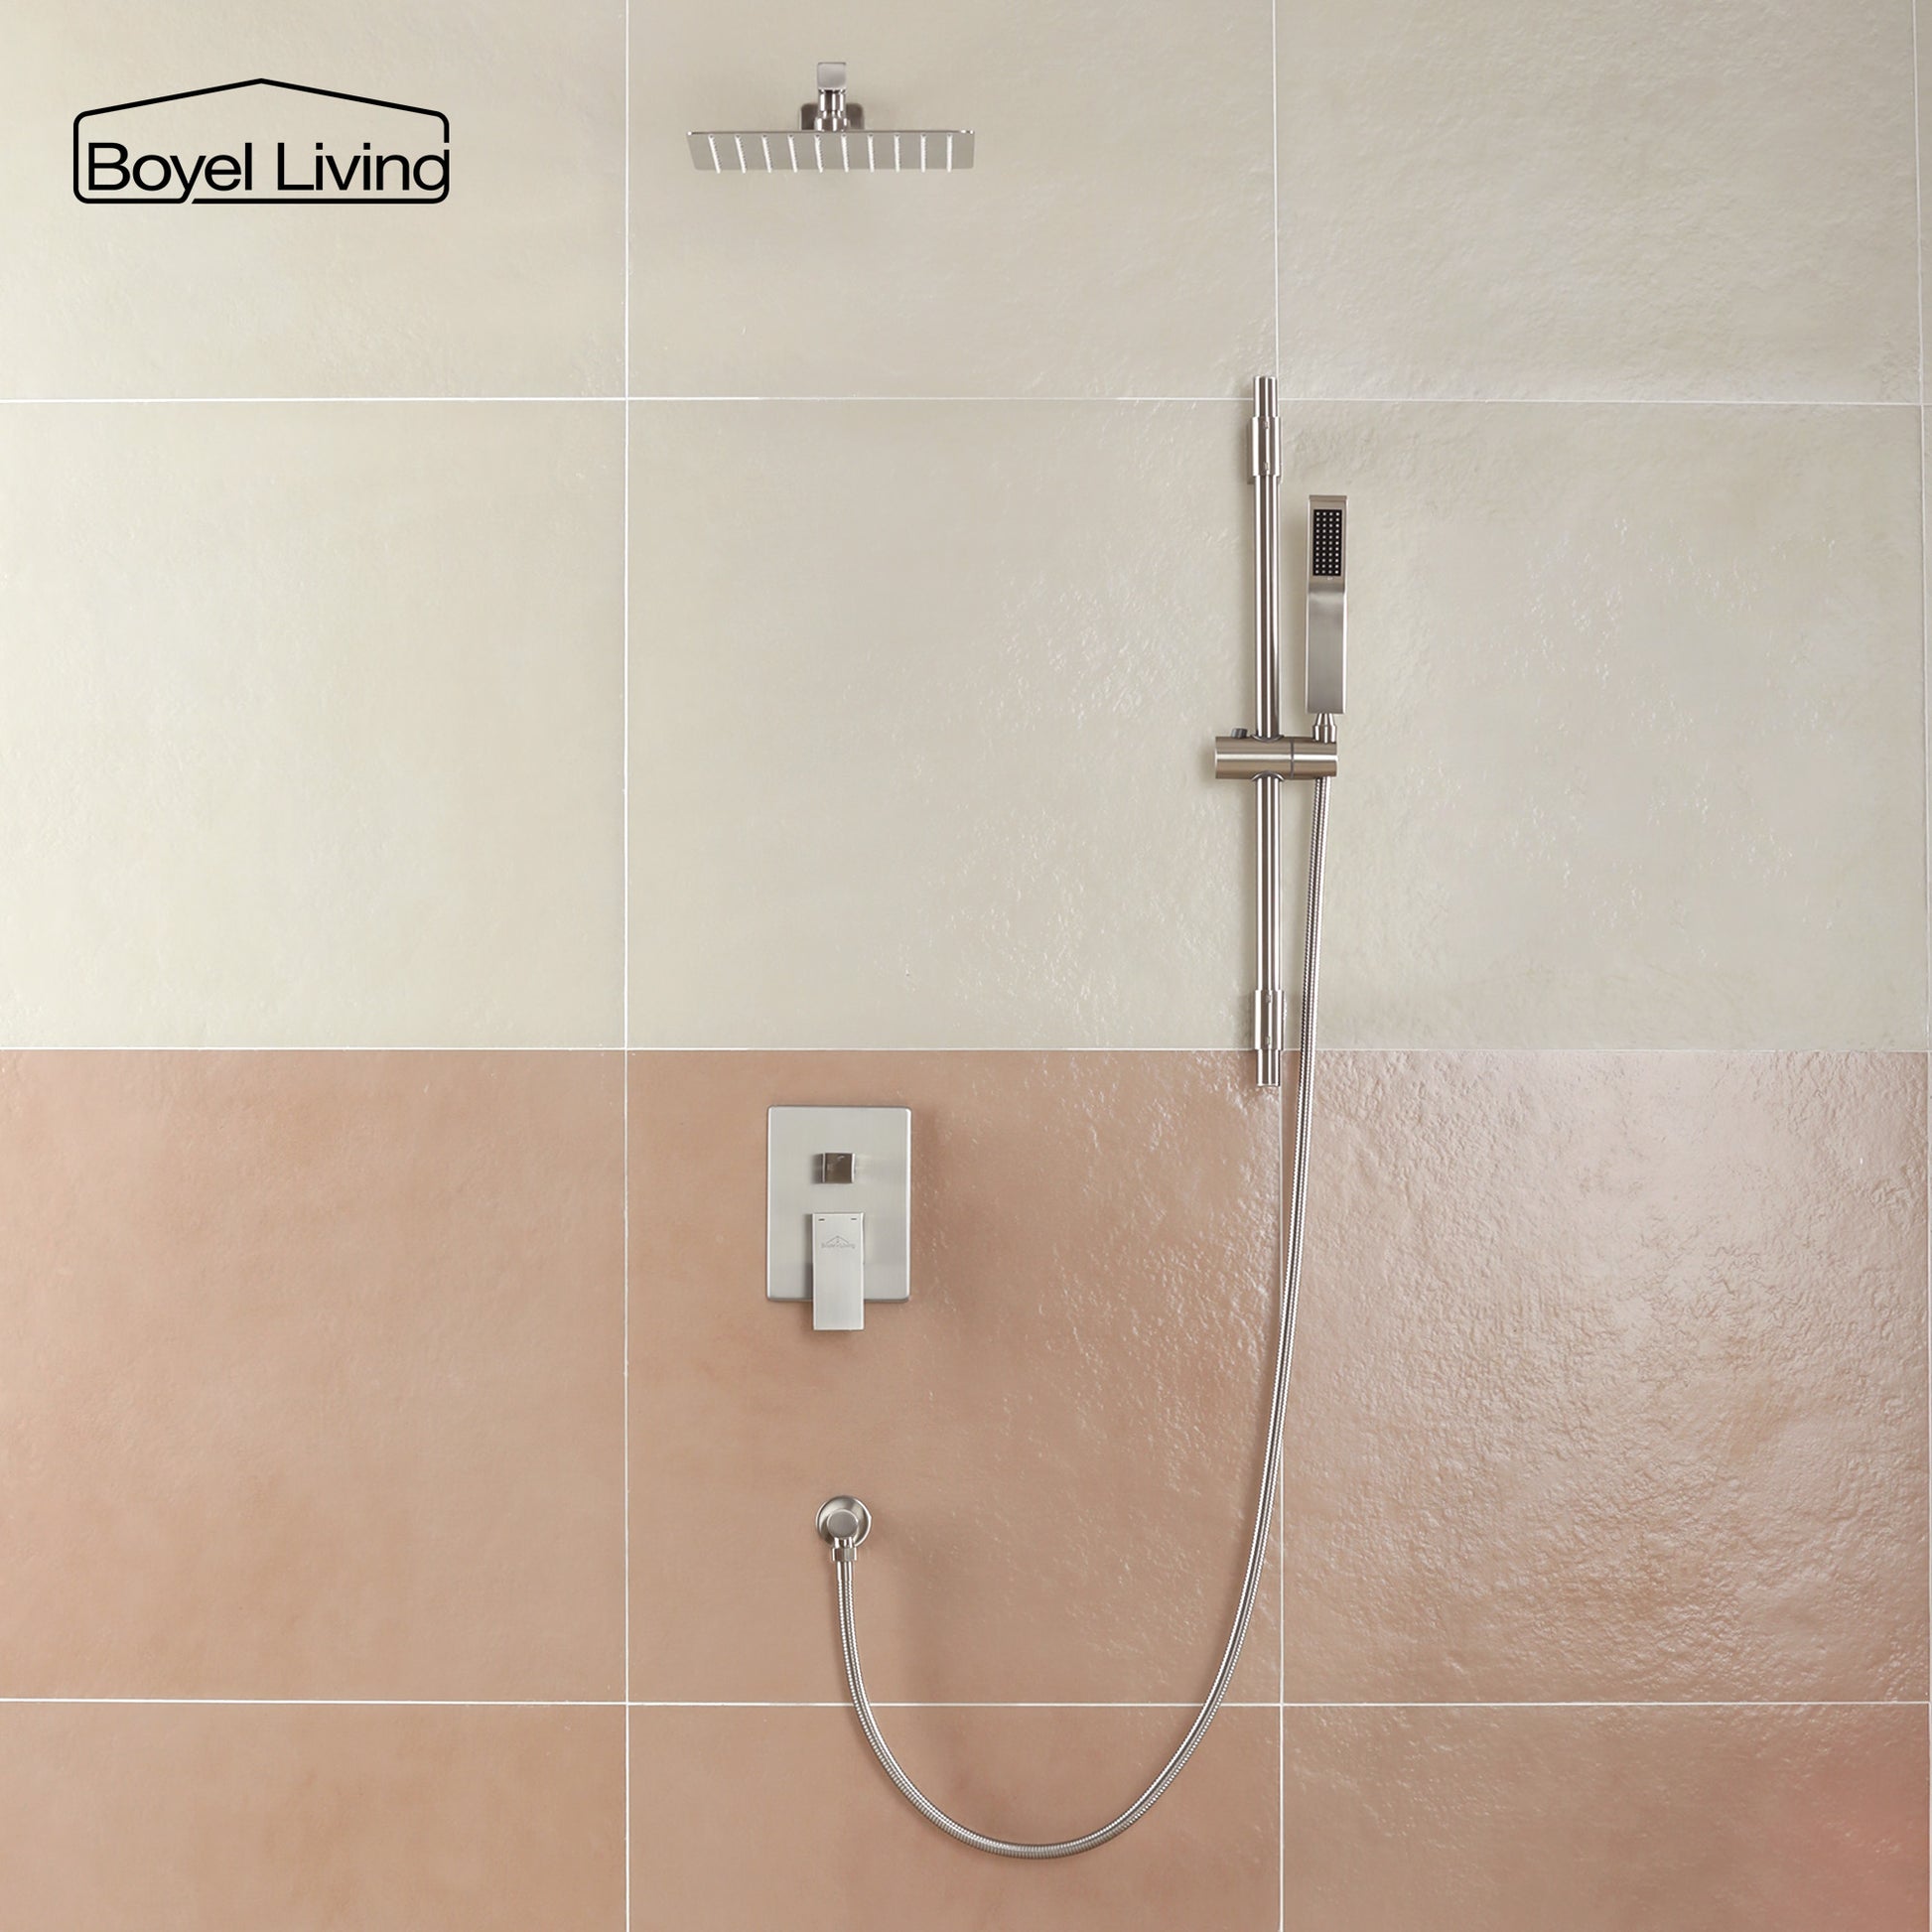 Boyel Living 2.5 GPM Wall Mount Dual Shower Heads, Shower System with Handheld in Brushed Nickel